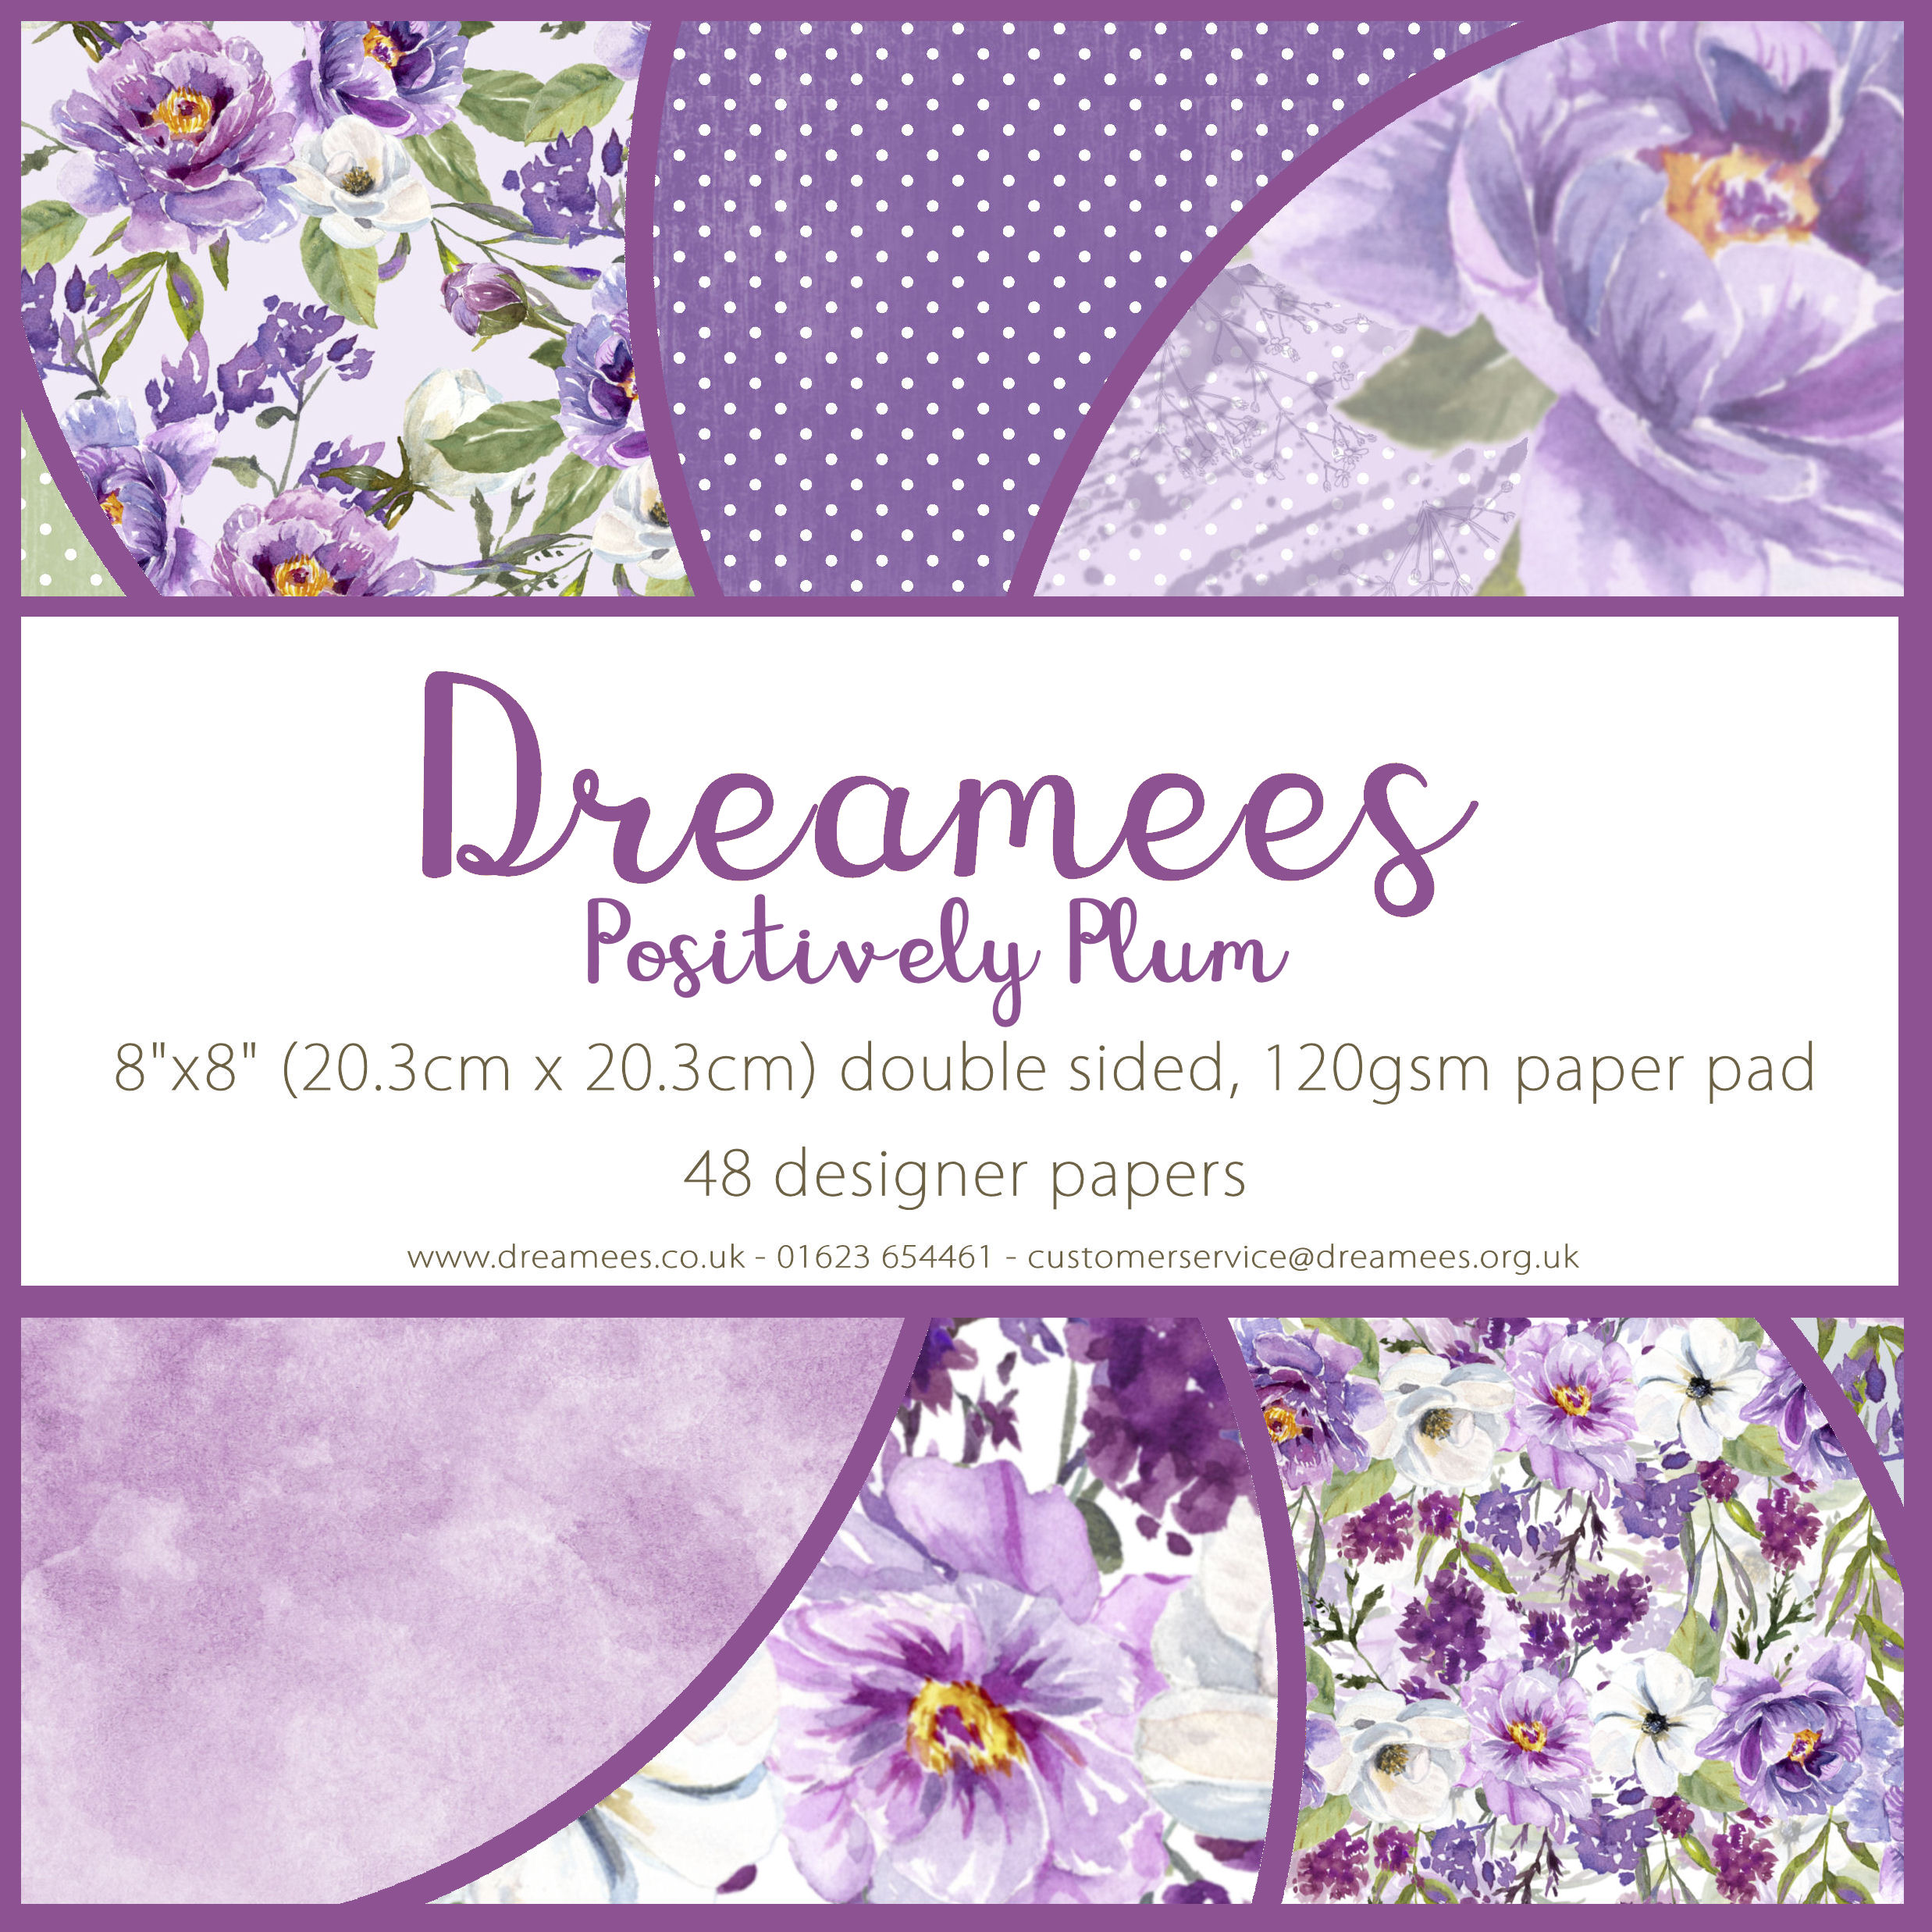 Dreamees Positively Plum 8x8 Paper Pad